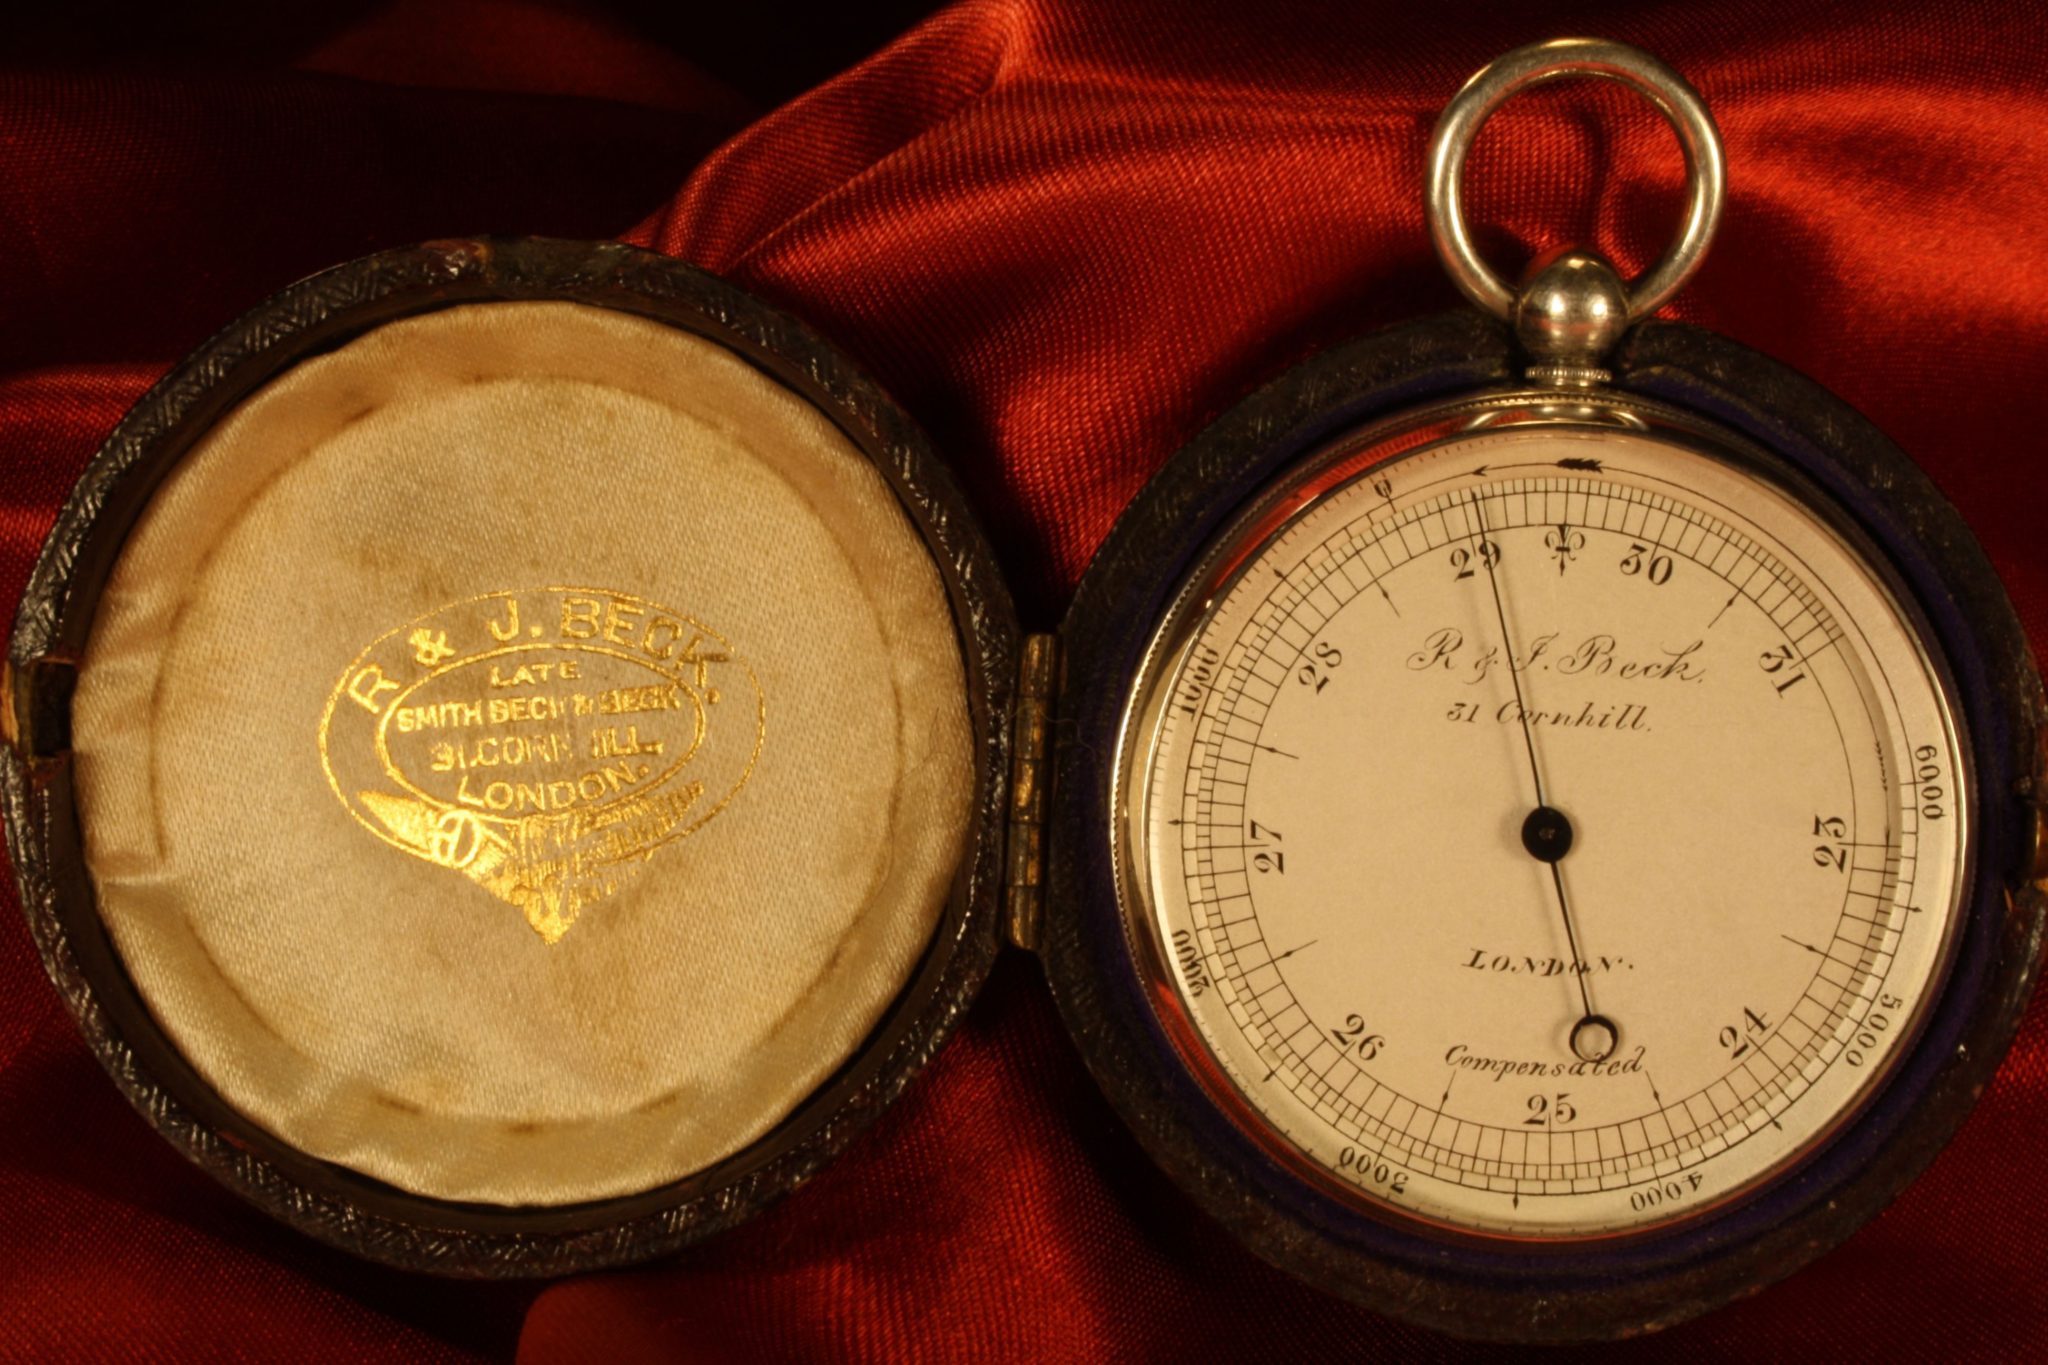 Image of German Silver Pocket Barometer by Negretti & Zambra Retailed by Beck c1867